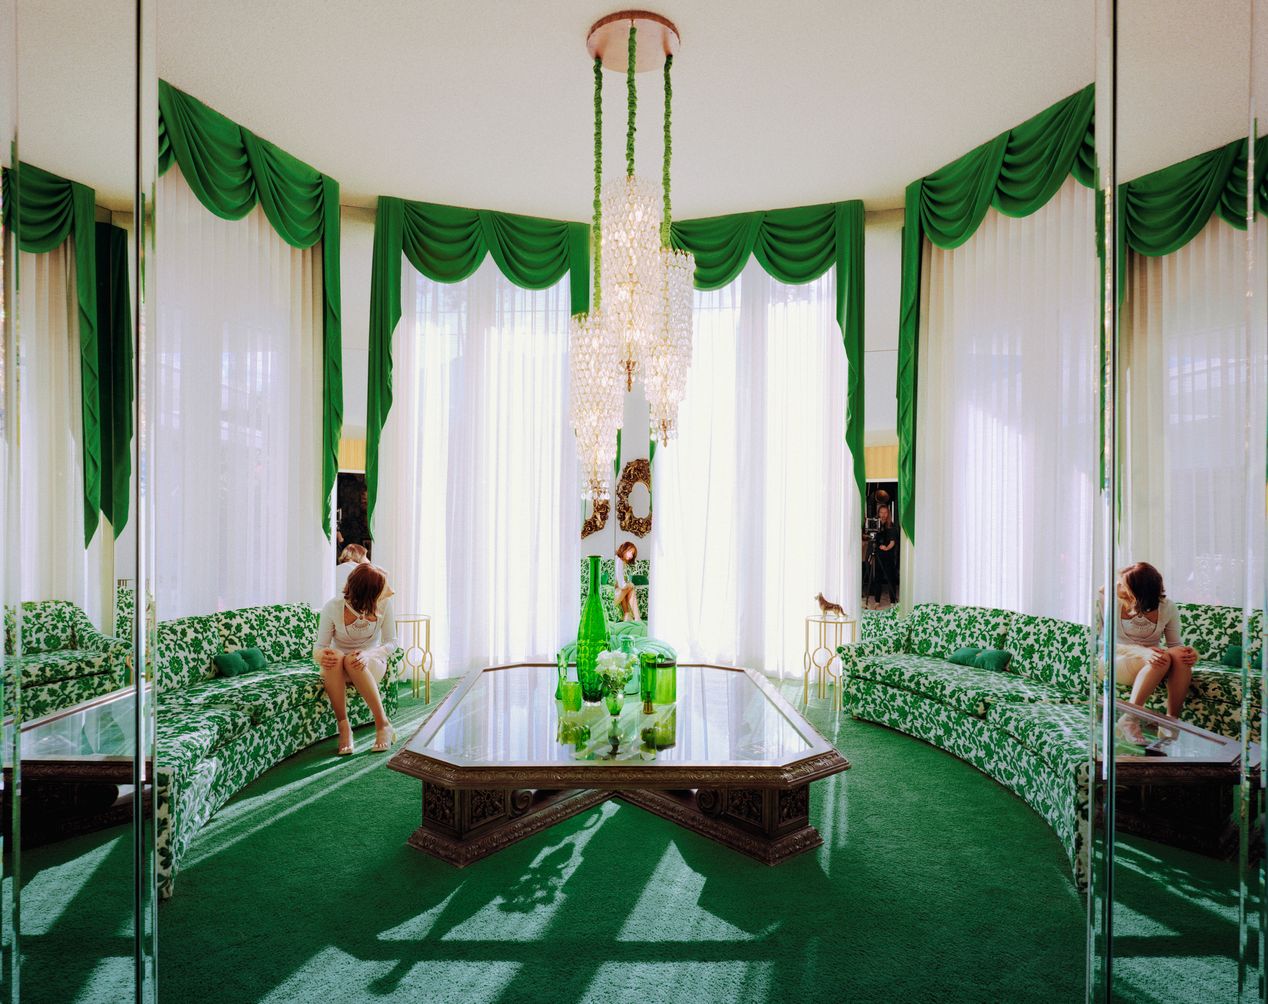 A woman, turned away is sitting in a large living room with green carpets and curtains and a green rug, art photography, Ilona Szwarc, contemporary Los Angeles artist.